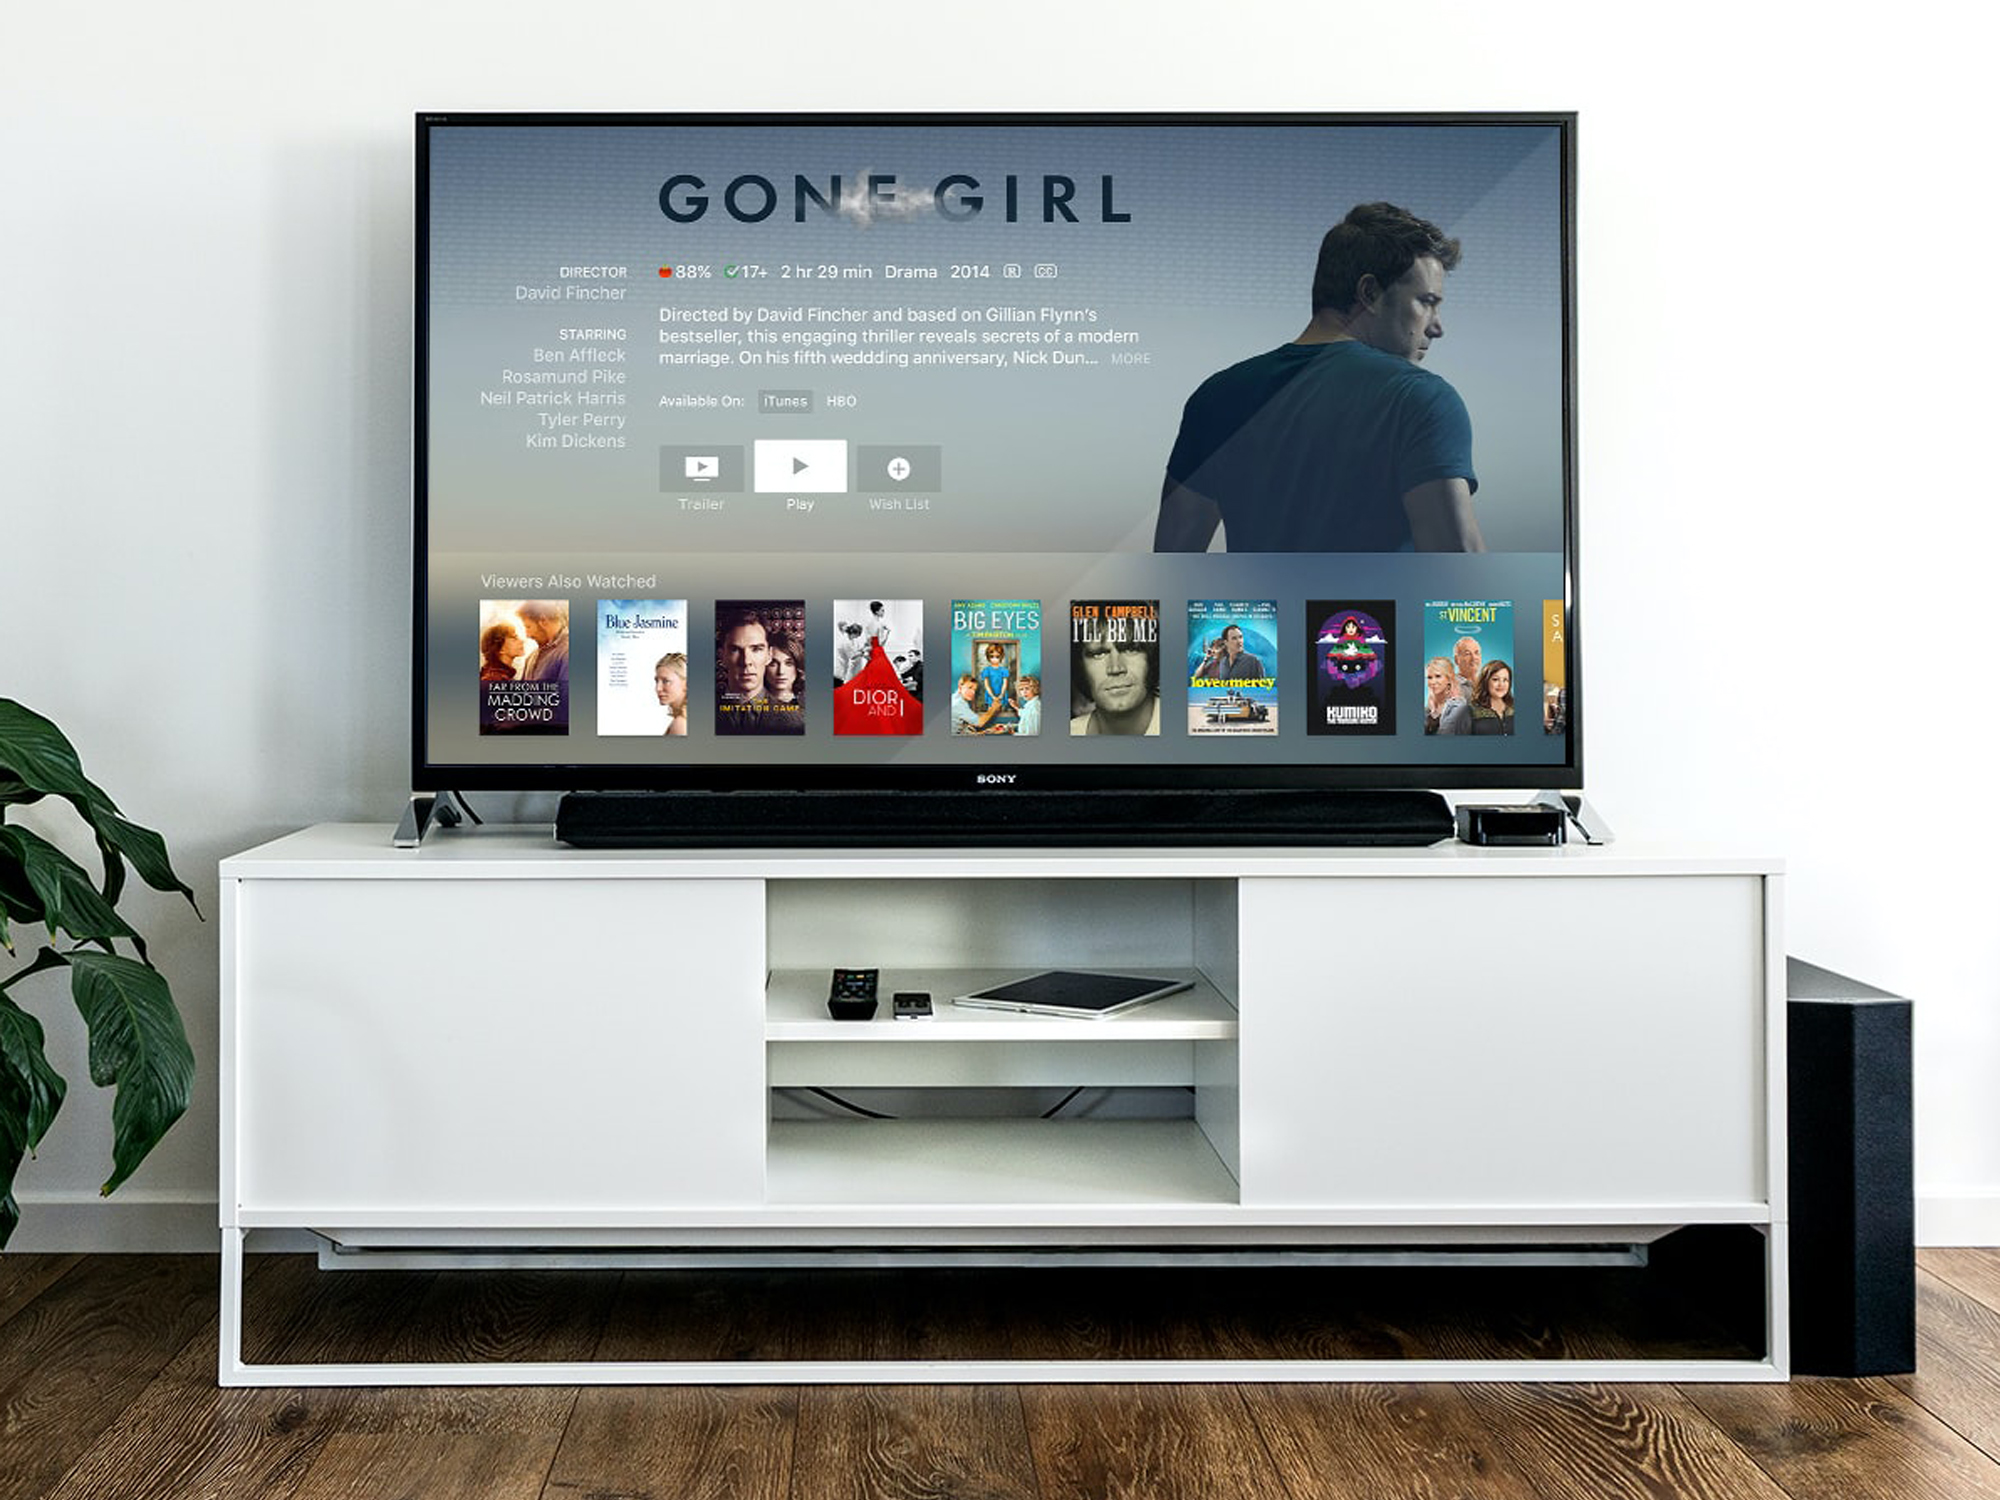 Smart TV vs streaming device: Don't buy a TV based on its software